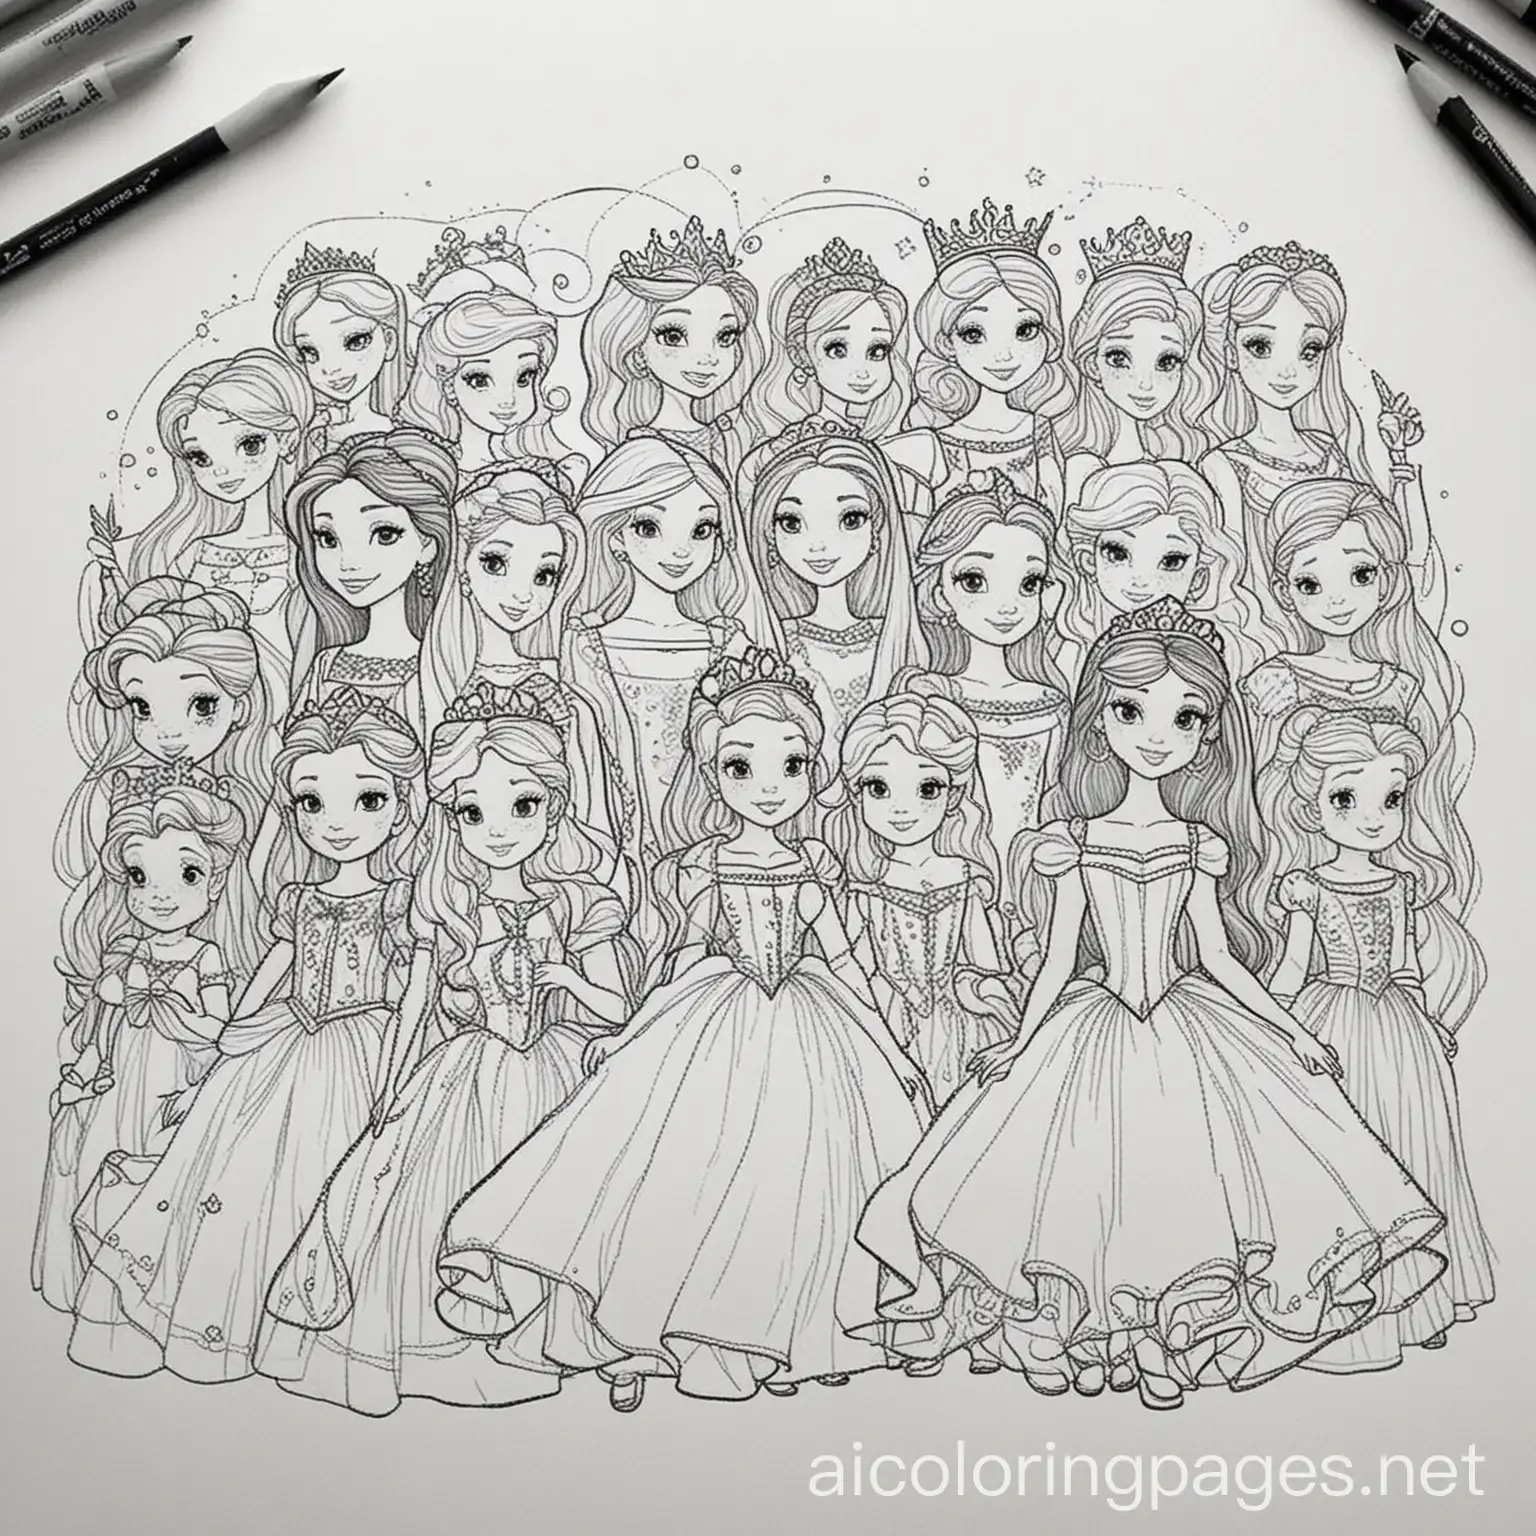 Princess-Coloring-Page-with-Simple-Outlines-on-White-Background